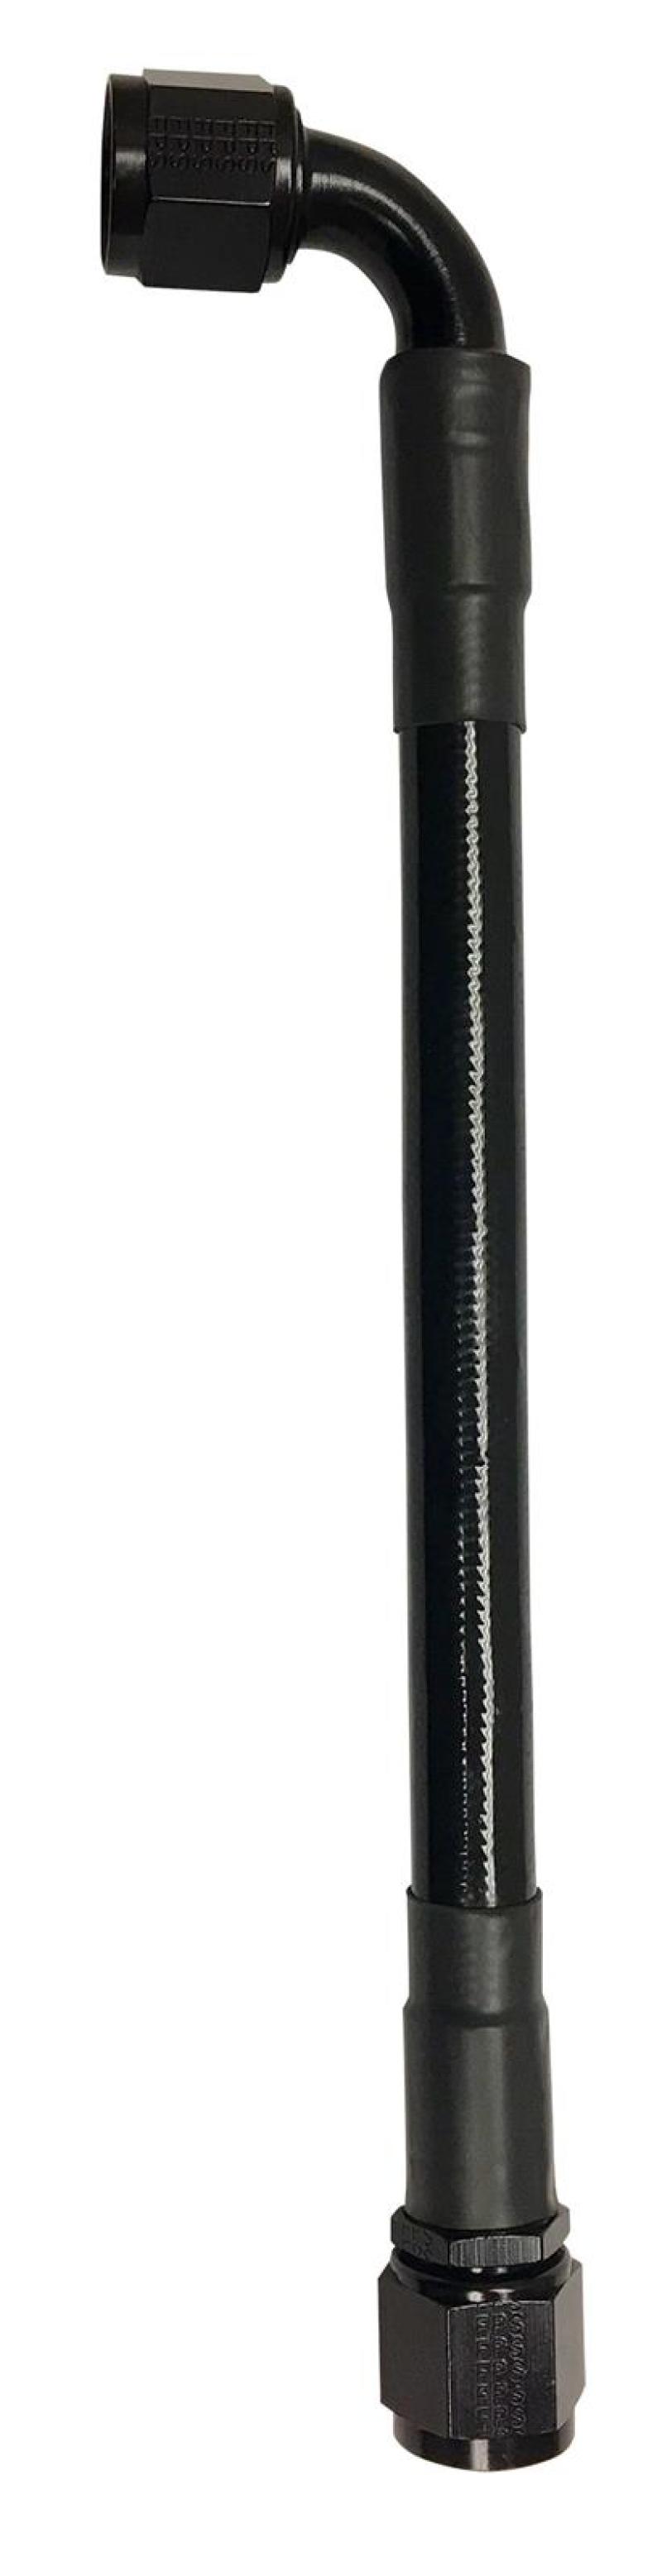 Fragola -8AN Ext Black PTFE Hose Assembly Straight x 90 Degree 42in - 6028-1-2-42BL